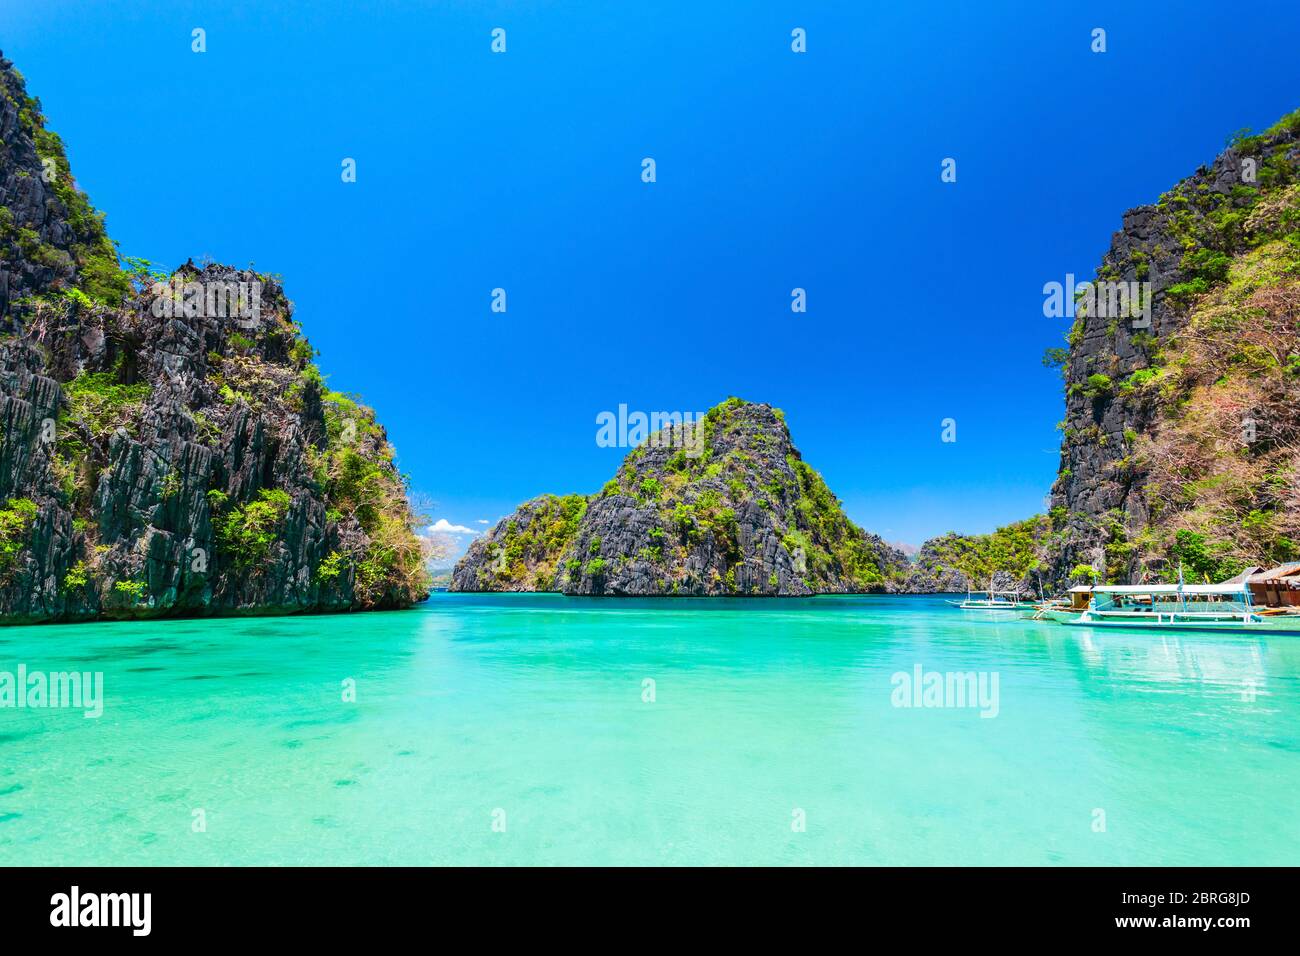 Blue lagoon tropical landscape at the Coron island bay in Palawan province Philippines Stock Photo